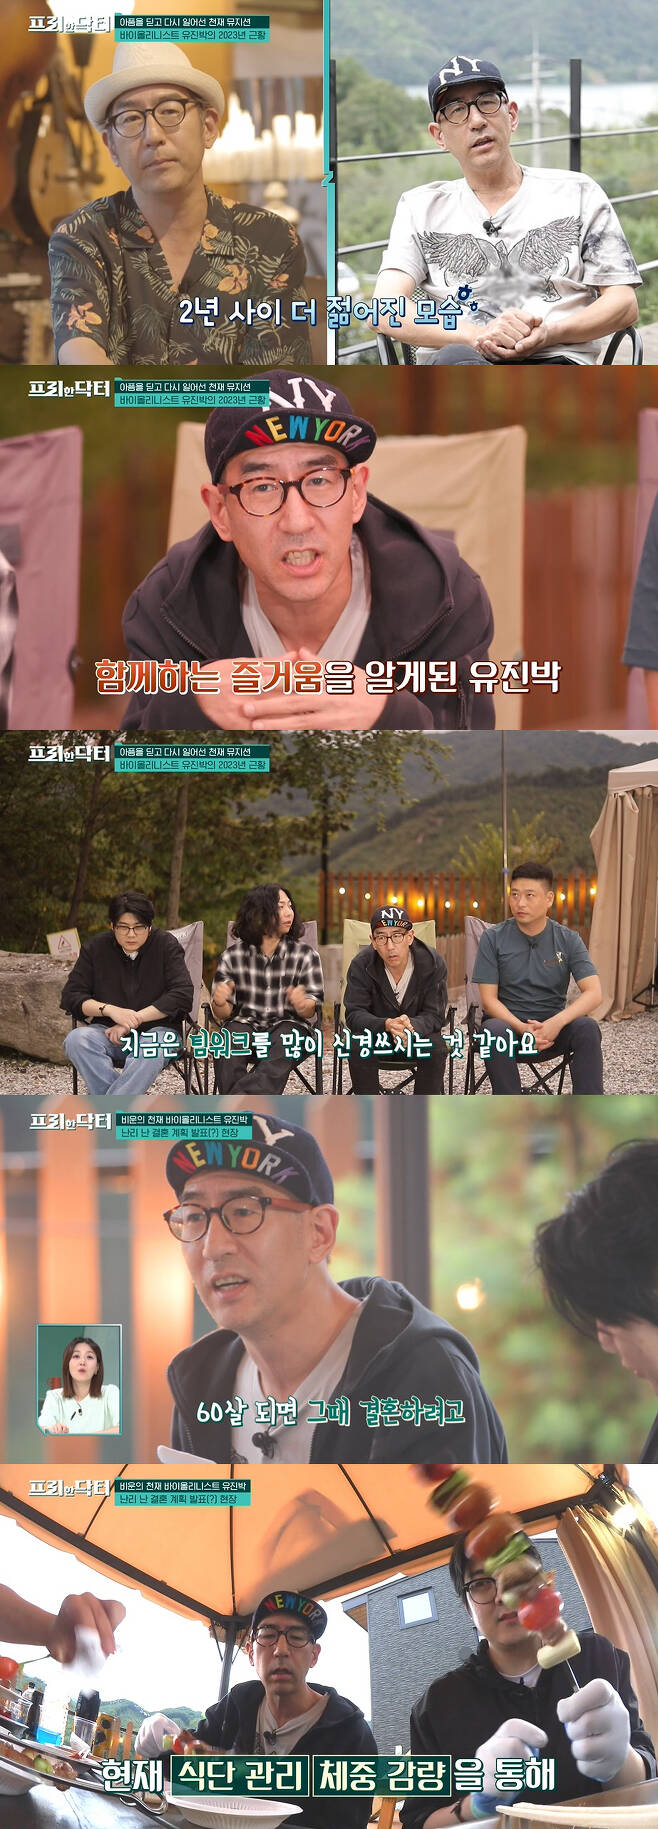 Violinist yu jin-bak gave a bright update.On TVN Free Doctor broadcasted on the 6th, yu jin-bak appeared.yu jin-bak formed the band Lee Yoo-jin and was active in various festivals and event stages. Members were the ones who allowed yu jin-bak to come out into the world.Members explained the change in yu jin-bak, saying, I remember the first time we played together. It was very different from then. At that time, I felt like yu jin-bak was going his own way, but now he cares a lot about teamwork.Yu jin-bak smiled sheepishly and admitted it.Members said they would also go to Camping to celebrate yu jin-baks birthday, which is not a special event but their annual event.Yu jin-bak had a good time at Camping, saying, I got a lot closer.In camping, yu jin-bak said, Our music is more important to the members question, Do not you have a girlfriend? But I want to get married when Im 60 years old.This band is important to me. It feels good to meet a friend with whom I can connect, he thanked the members.Yu jin-bak is preparing for a solo concert following the second album of Lee Yoo-jin, and the management of profits such as albums and performances is thoroughly done by legal guardian lawyers.Yu jin-bak also said that he dreamed of going out into the world.On the other hand, yu jin-bak was called a genius musician and received attention, but in 2009 and 2019, the manager was shocked to hear that he was assaulted, detained, embezzled and exploited.